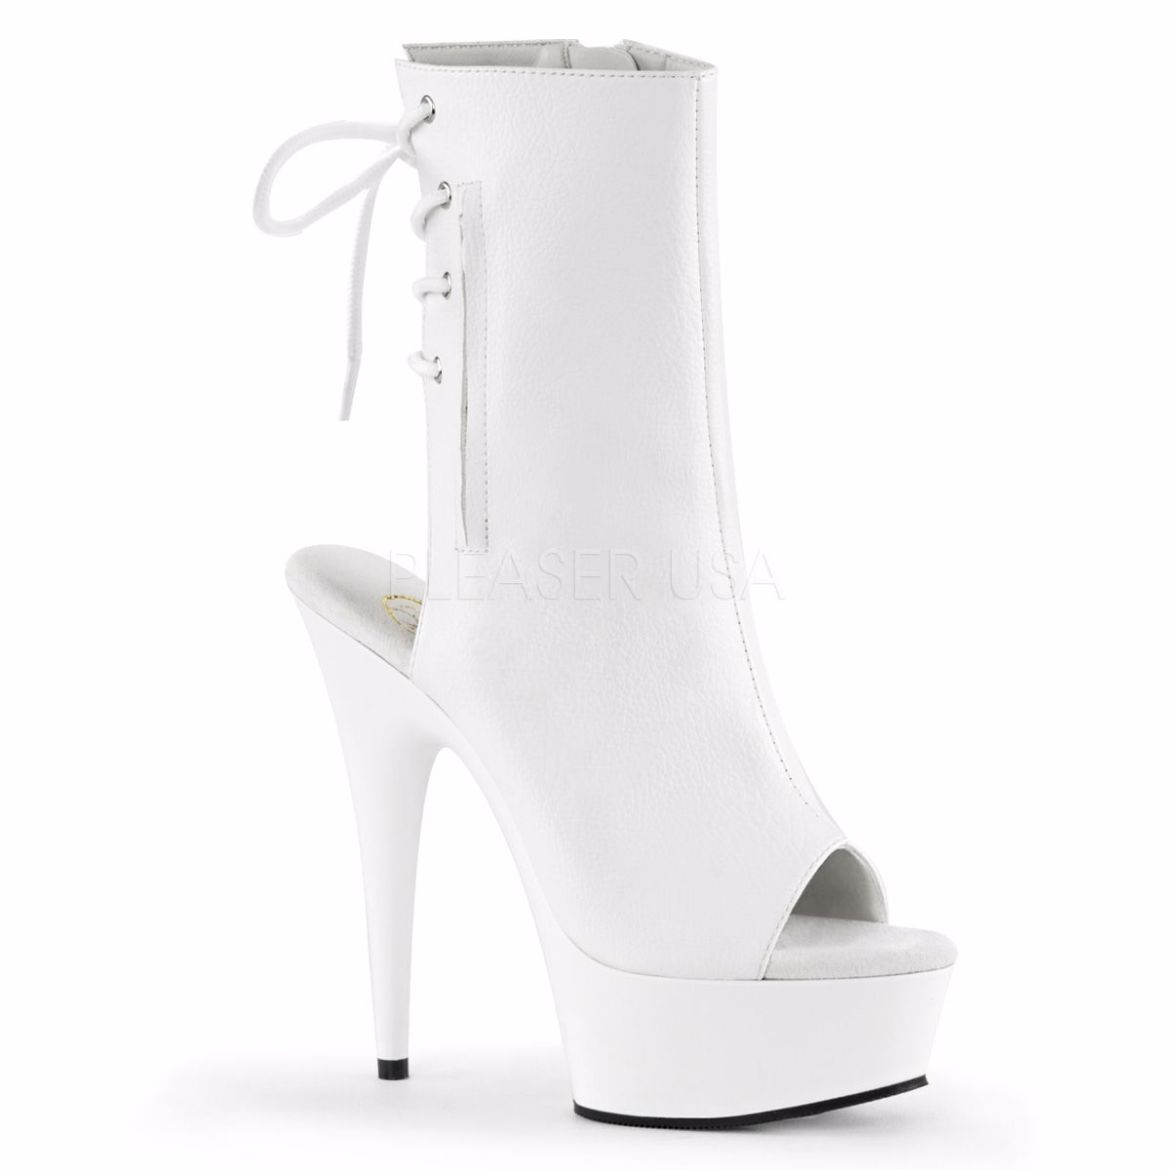 Product image of Pleaser Delight-1018 White Faux Leather/White, 6 inch (15.2 cm) Heel, 1 3/4 inch (4.4 cm) Platform Ankle Boot